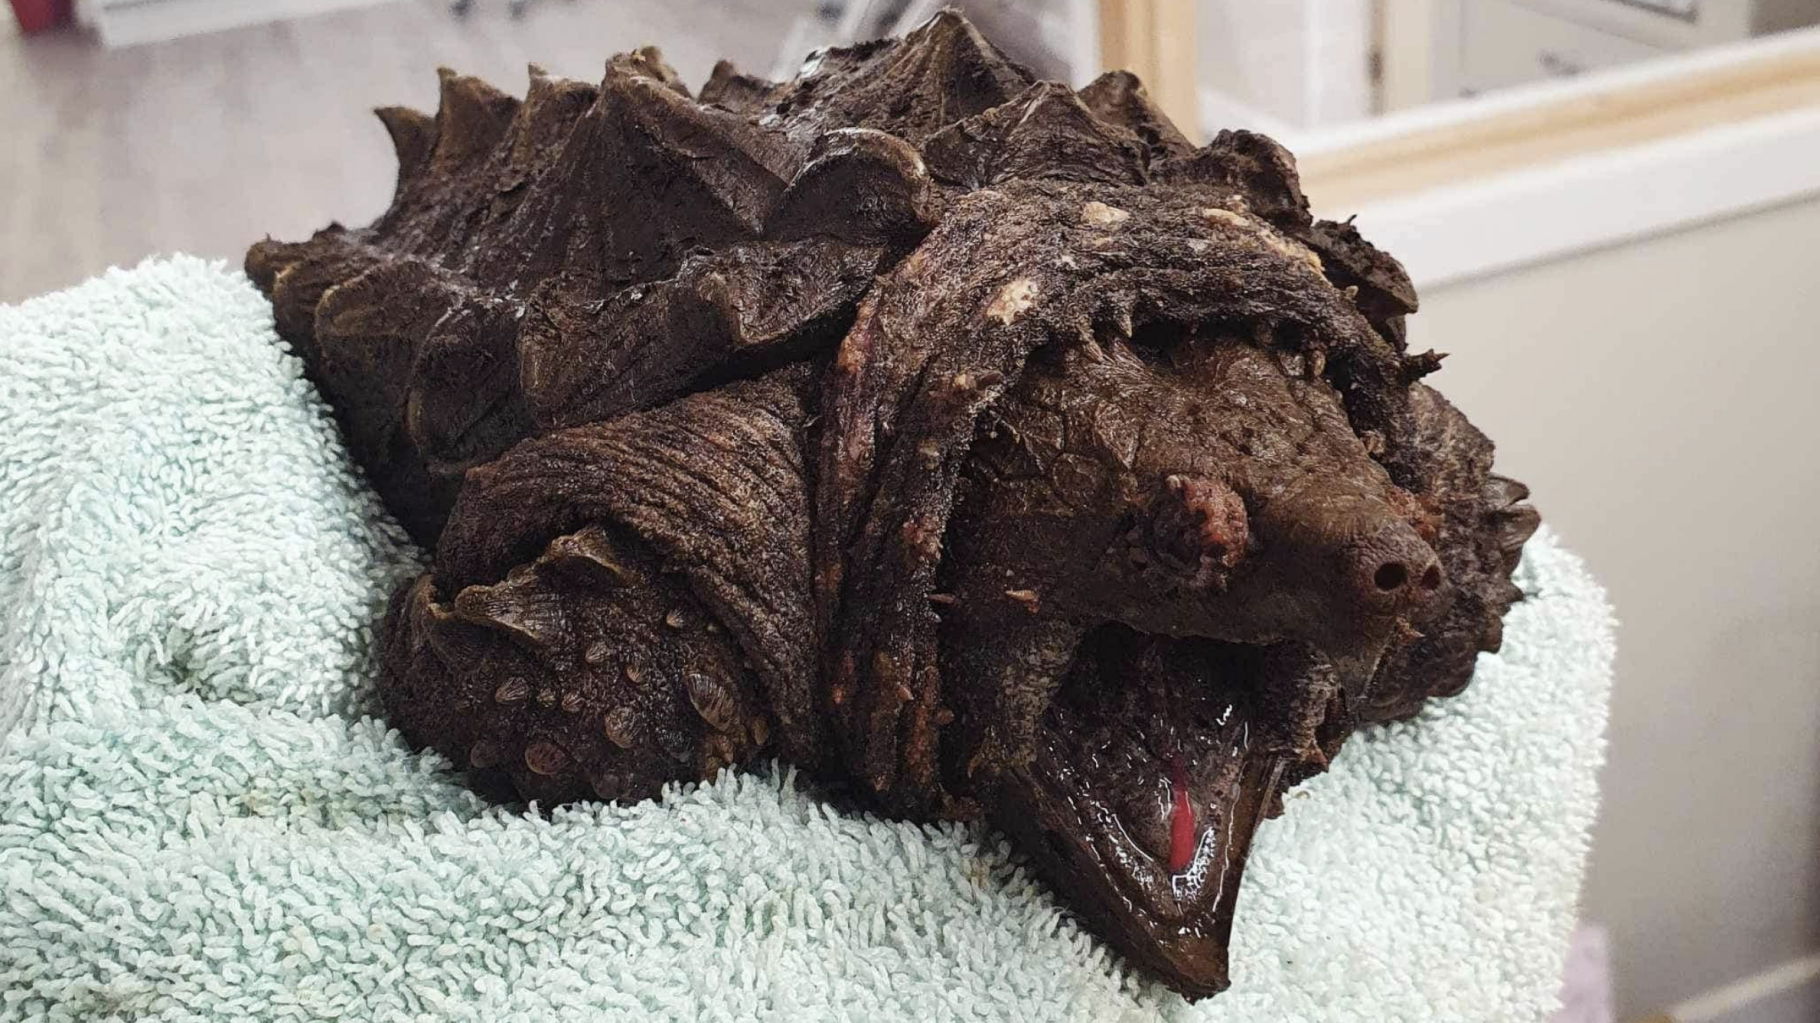 This Turtle Caught in England Is Terrible (and Aggressive)